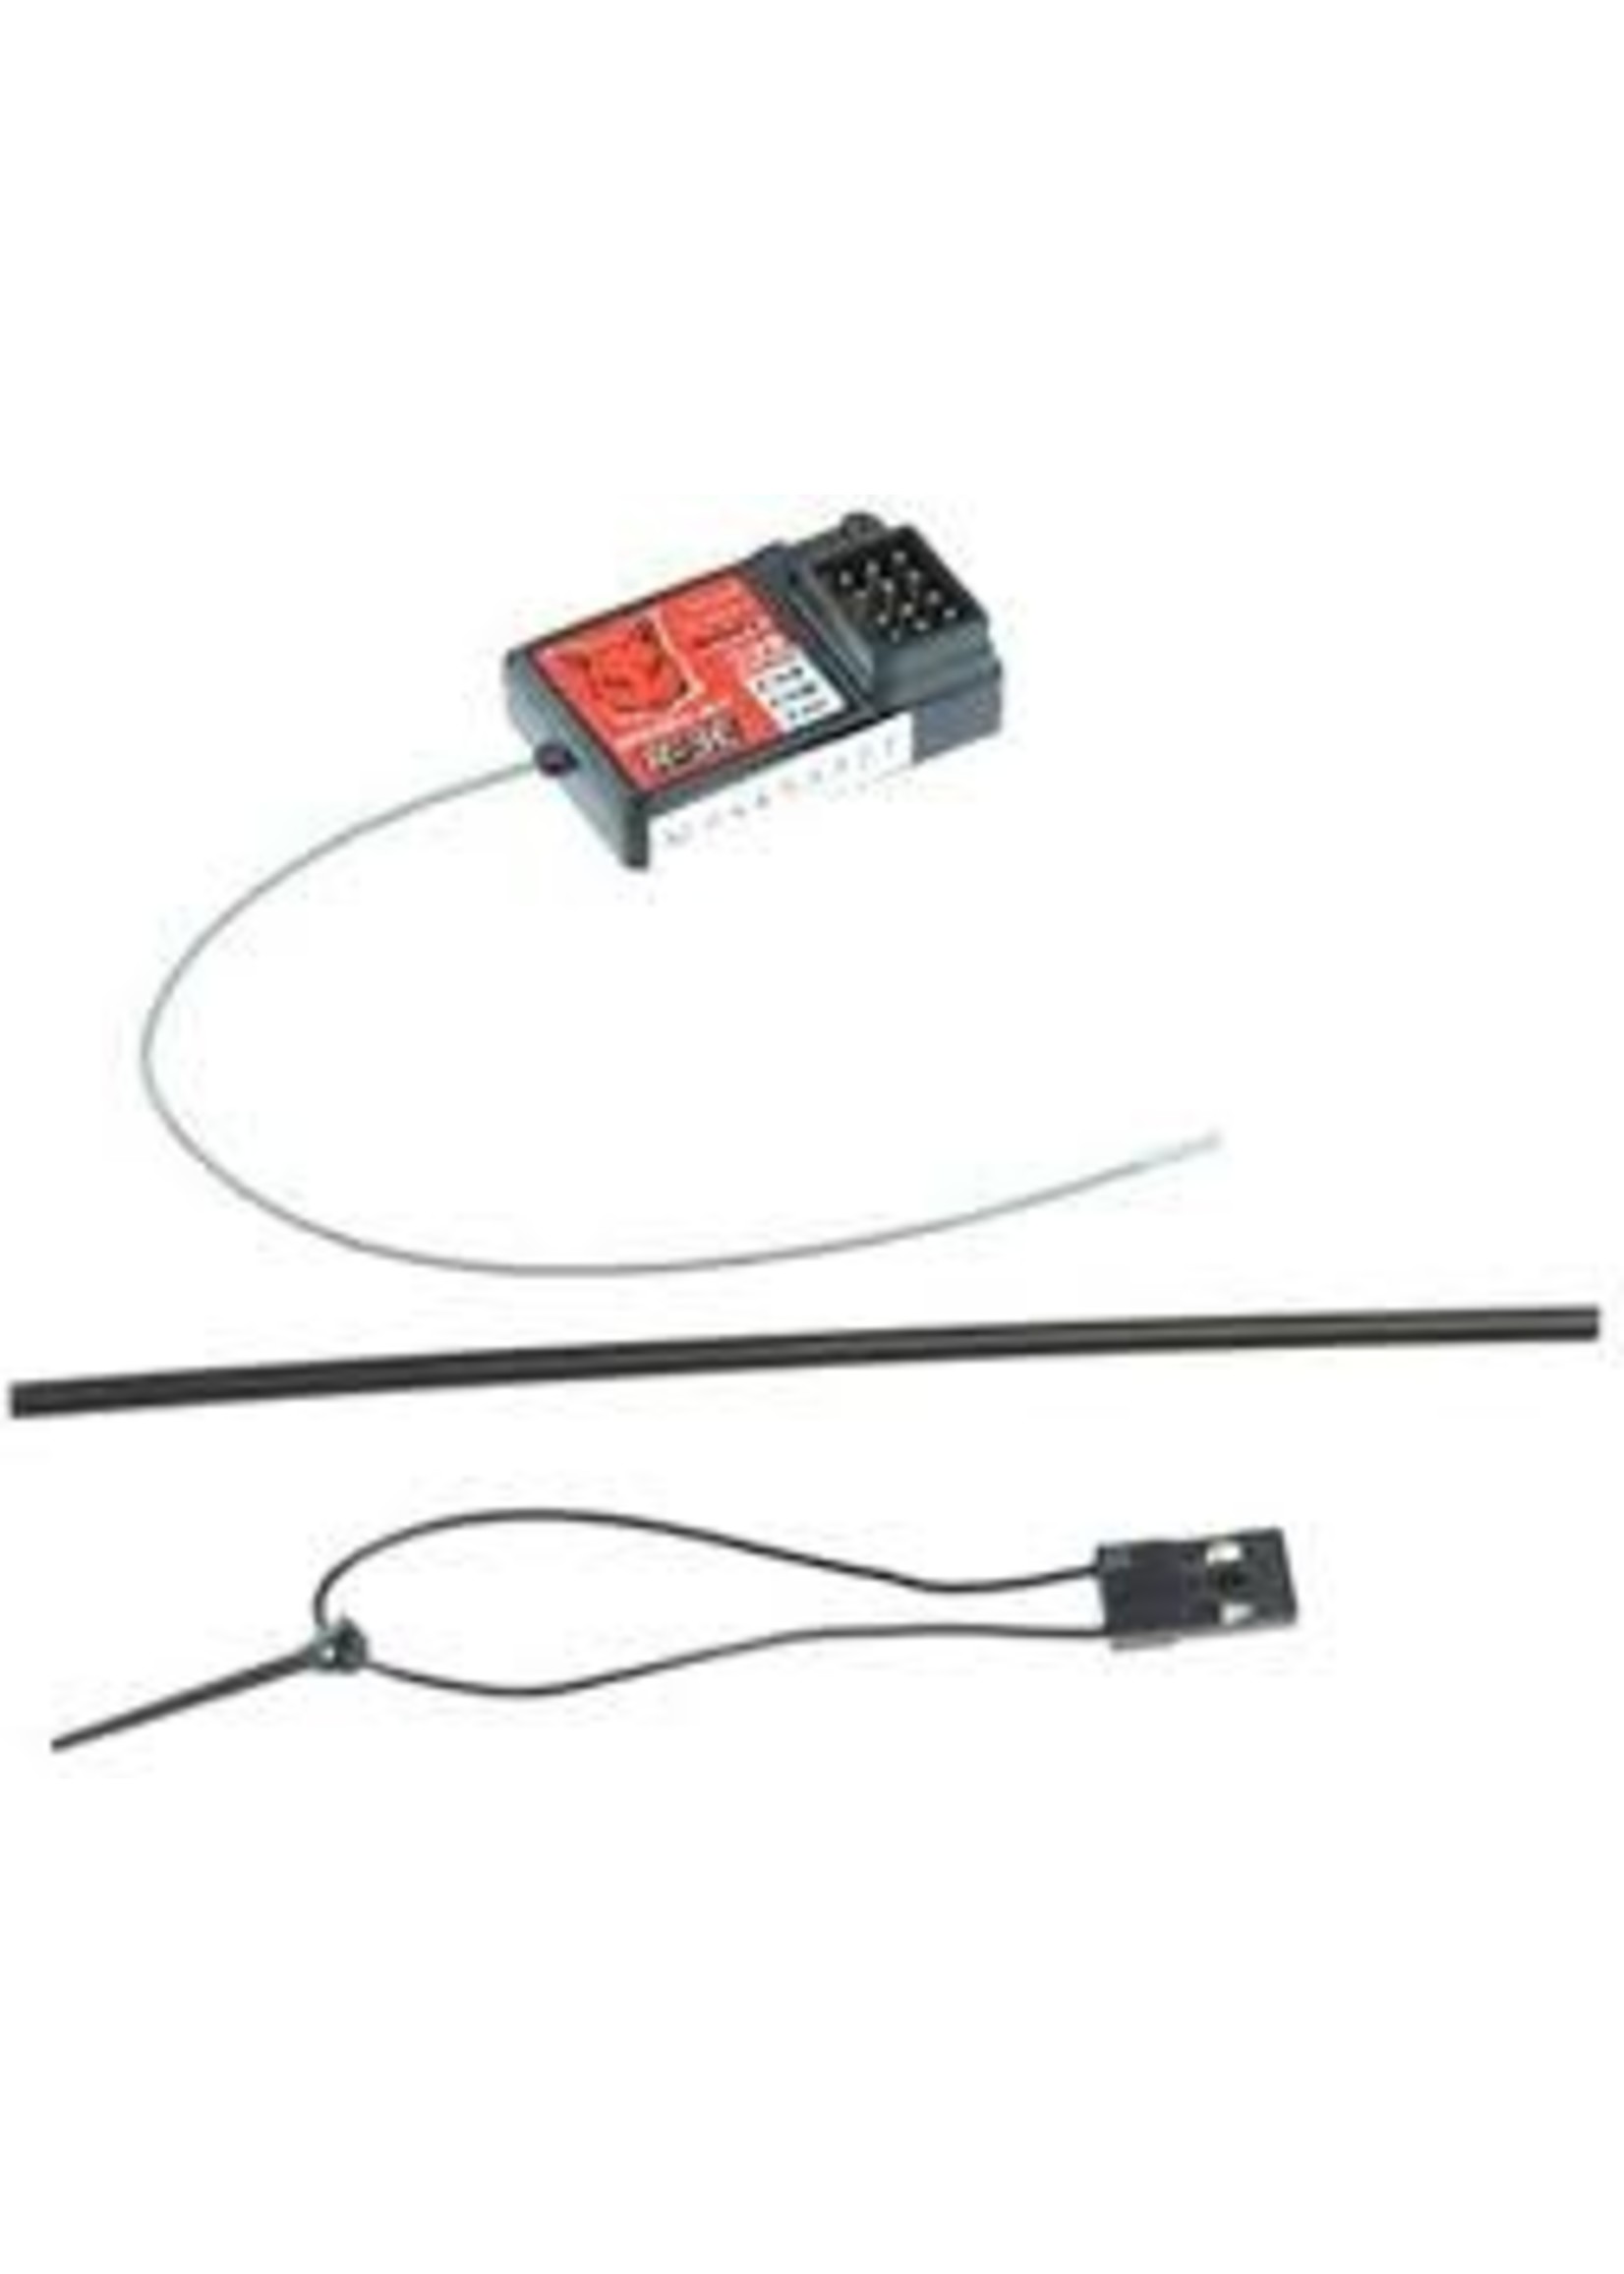 Redcat Racing 28480 Receiver (Flysky FS-A3) (Compatible with RCR-2CENR radio)